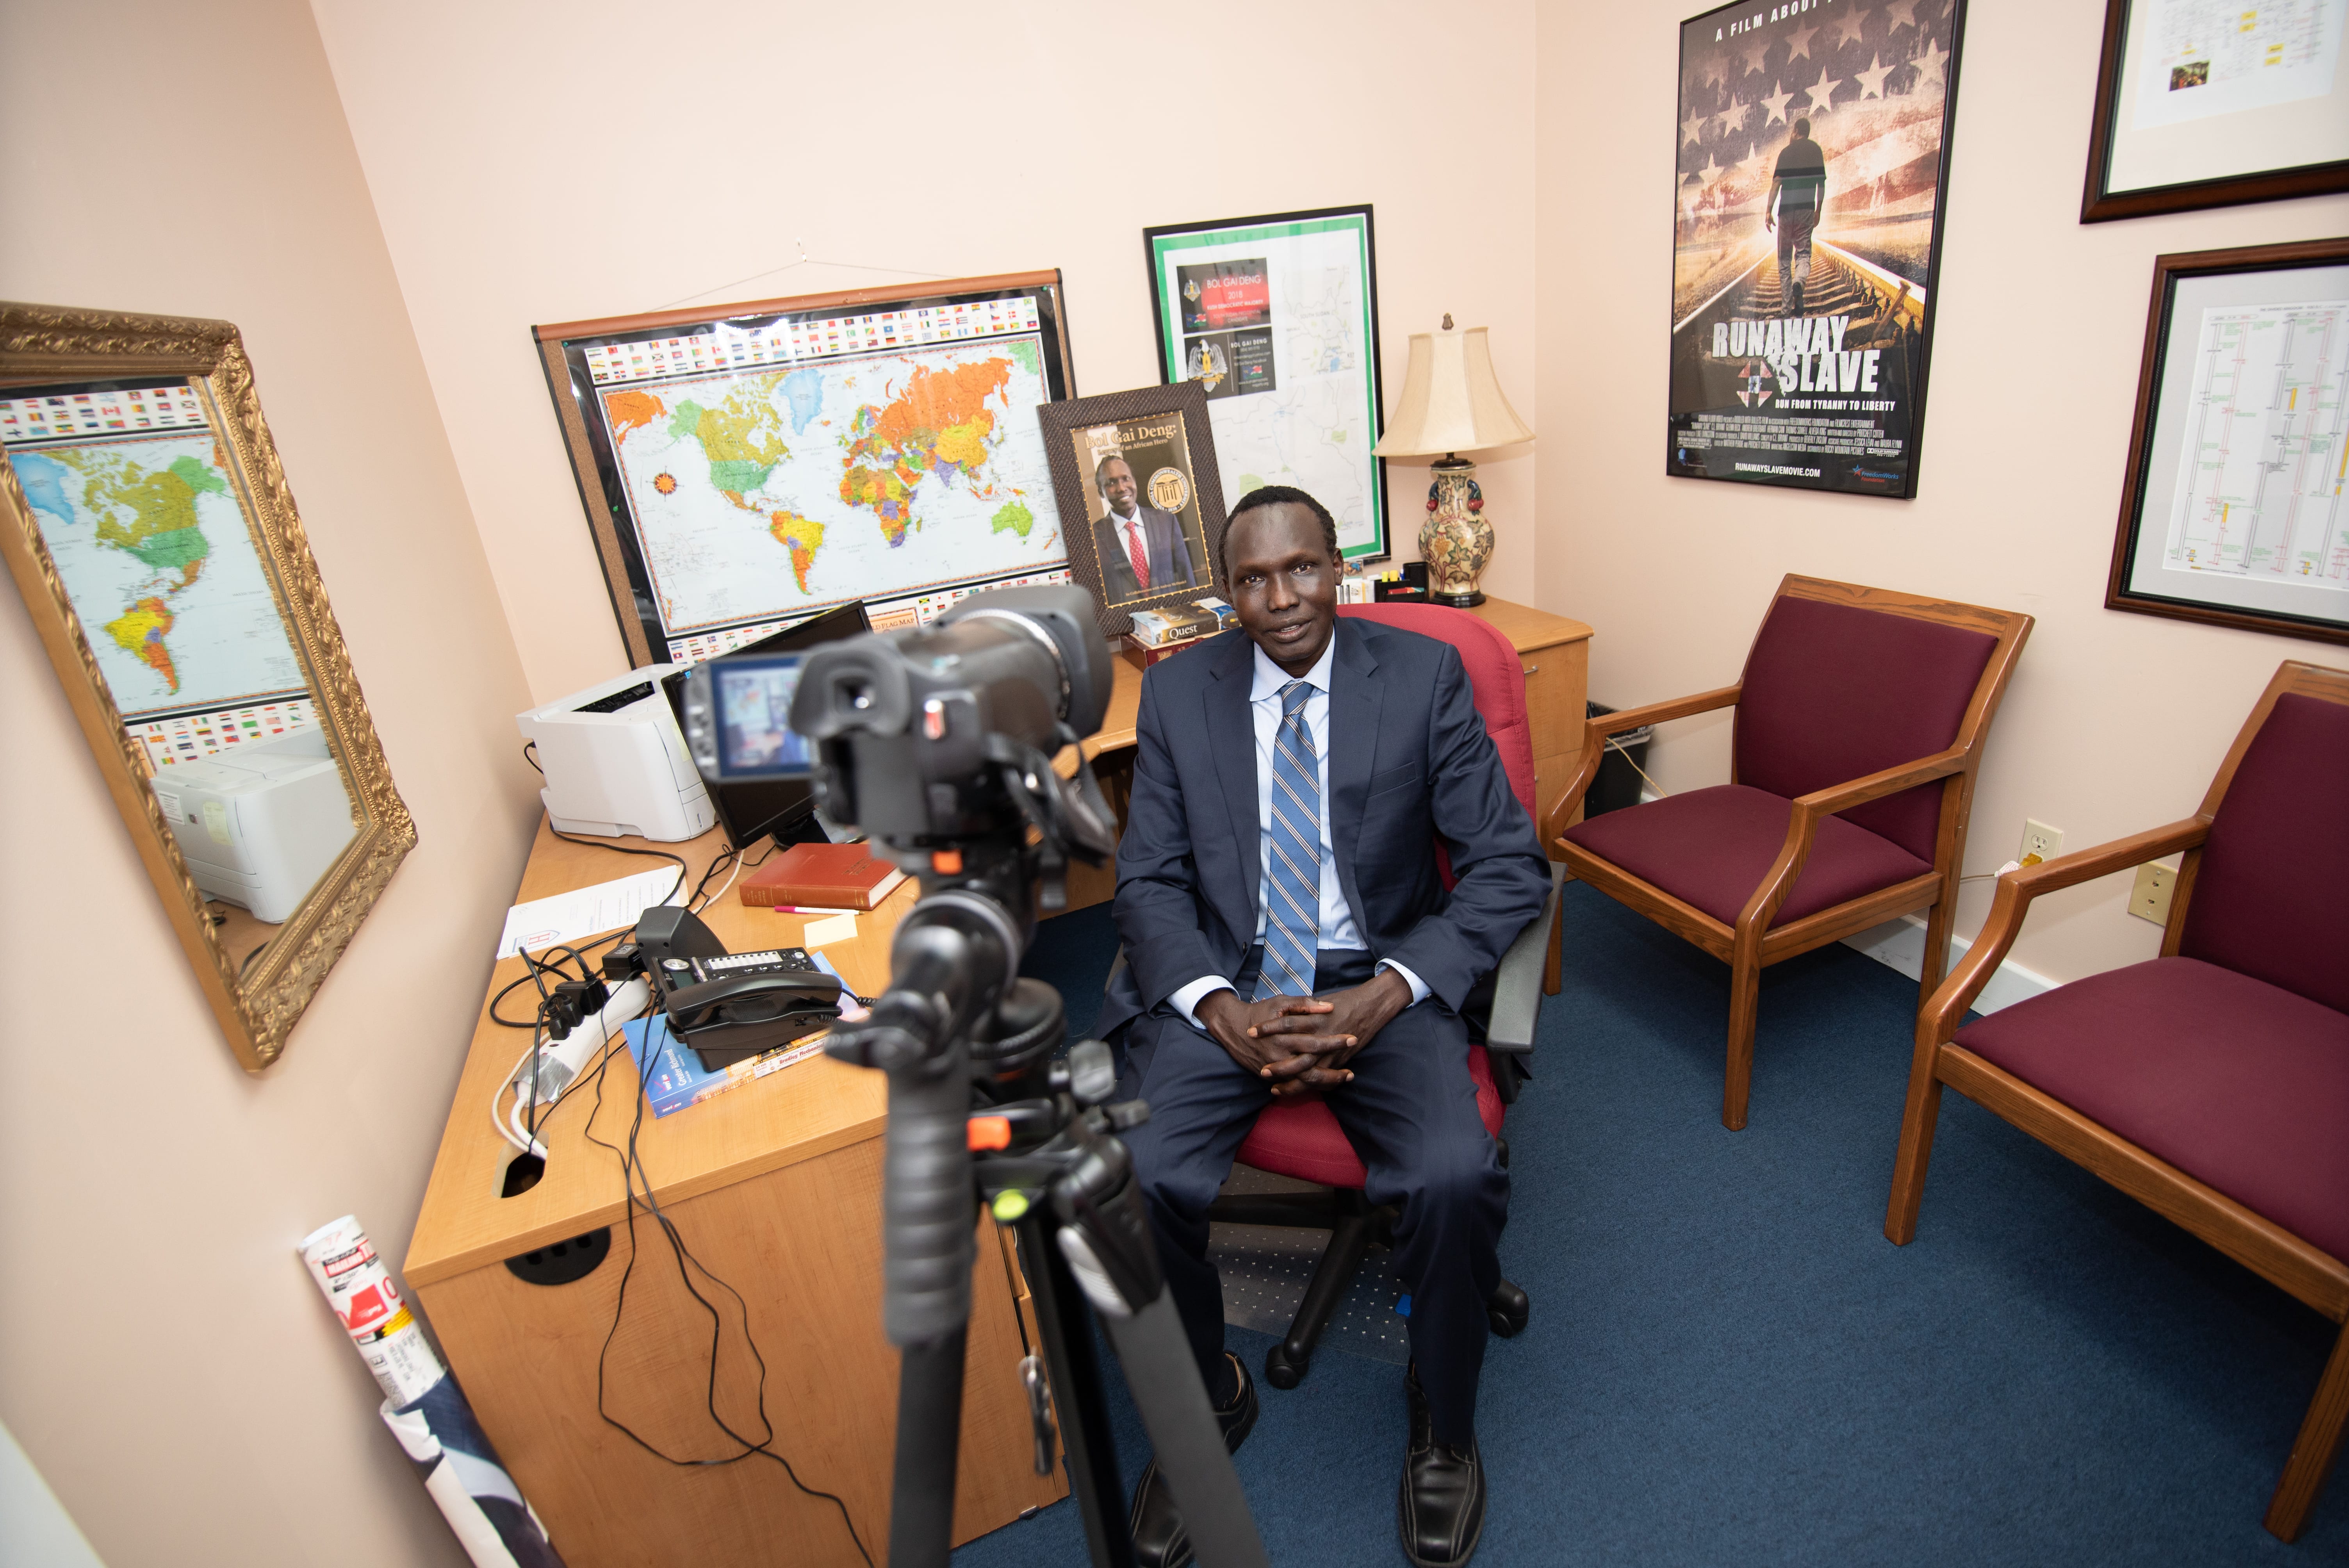 Bol Gai Deng sits in an office. In the background are world maps and a poster for the movie "Runaway Slave."